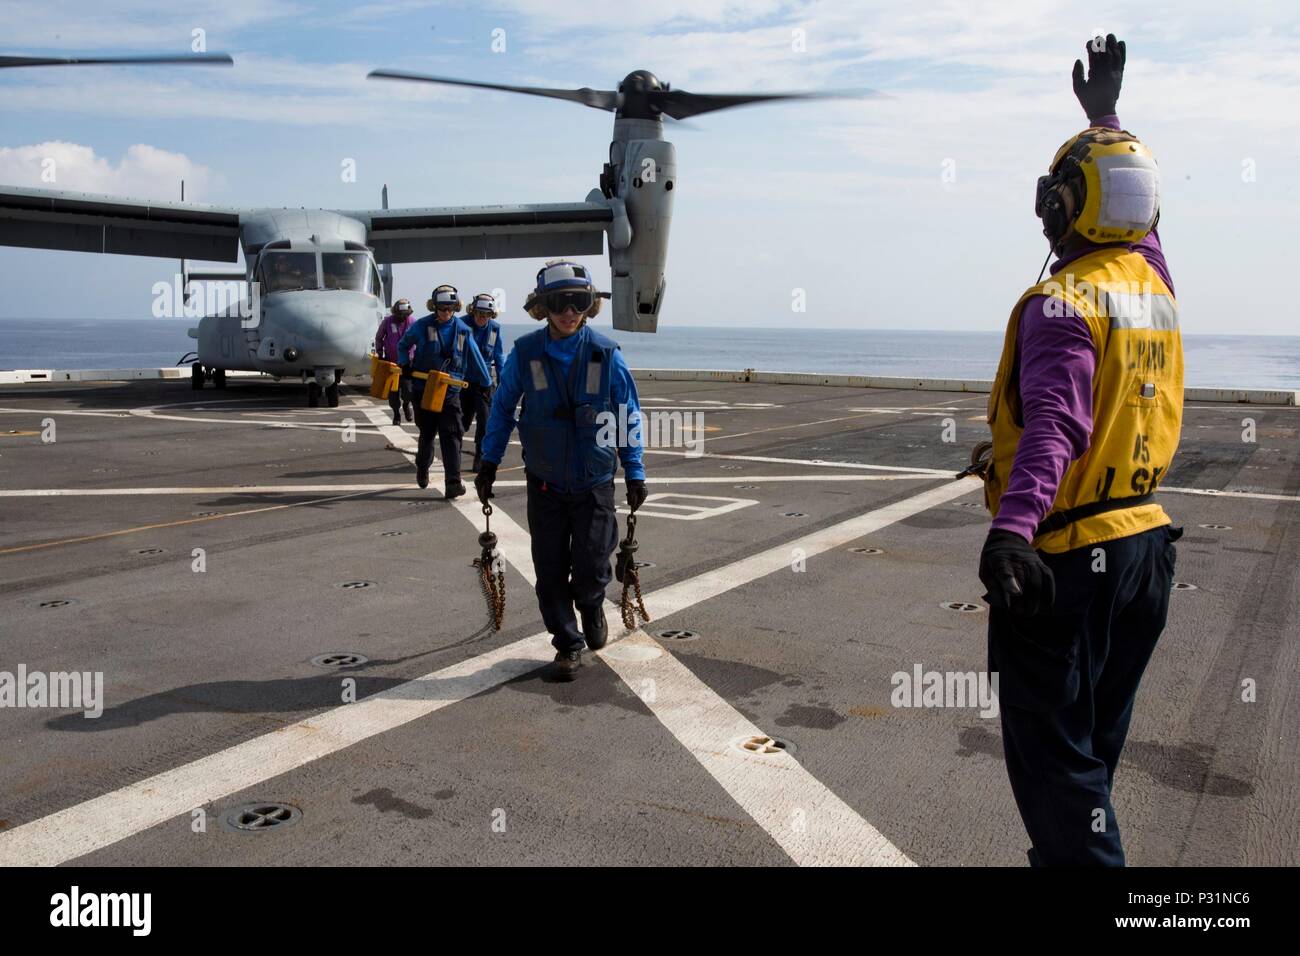 ABOARD USS GREEN BAY (LPD-20), At Sea (Aug. 22, 2016) – U.S. Navy Petty Officer 2nd Class Torien Collins, an aviation boatswain's mate, directs sailors away from a U.S. Marine Corps MV-22B Osprey tiltrotor aircraft from Marine Medium Tiltrotor Squadron 262 (reinforced), 31st Marine Expeditionary Unit, on the flight deck of the USS Green Bay (LPD-20), at sea, Aug. 22, 2016. Marines of the 31st MEU are currently embarked on ships of the USS Bonhomme Richard Expeditionary Strike Group for a regularly scheduled fall patrol of the Asia-Pacific region. The 31st MEU combines air-ground-logistics into Stock Photo